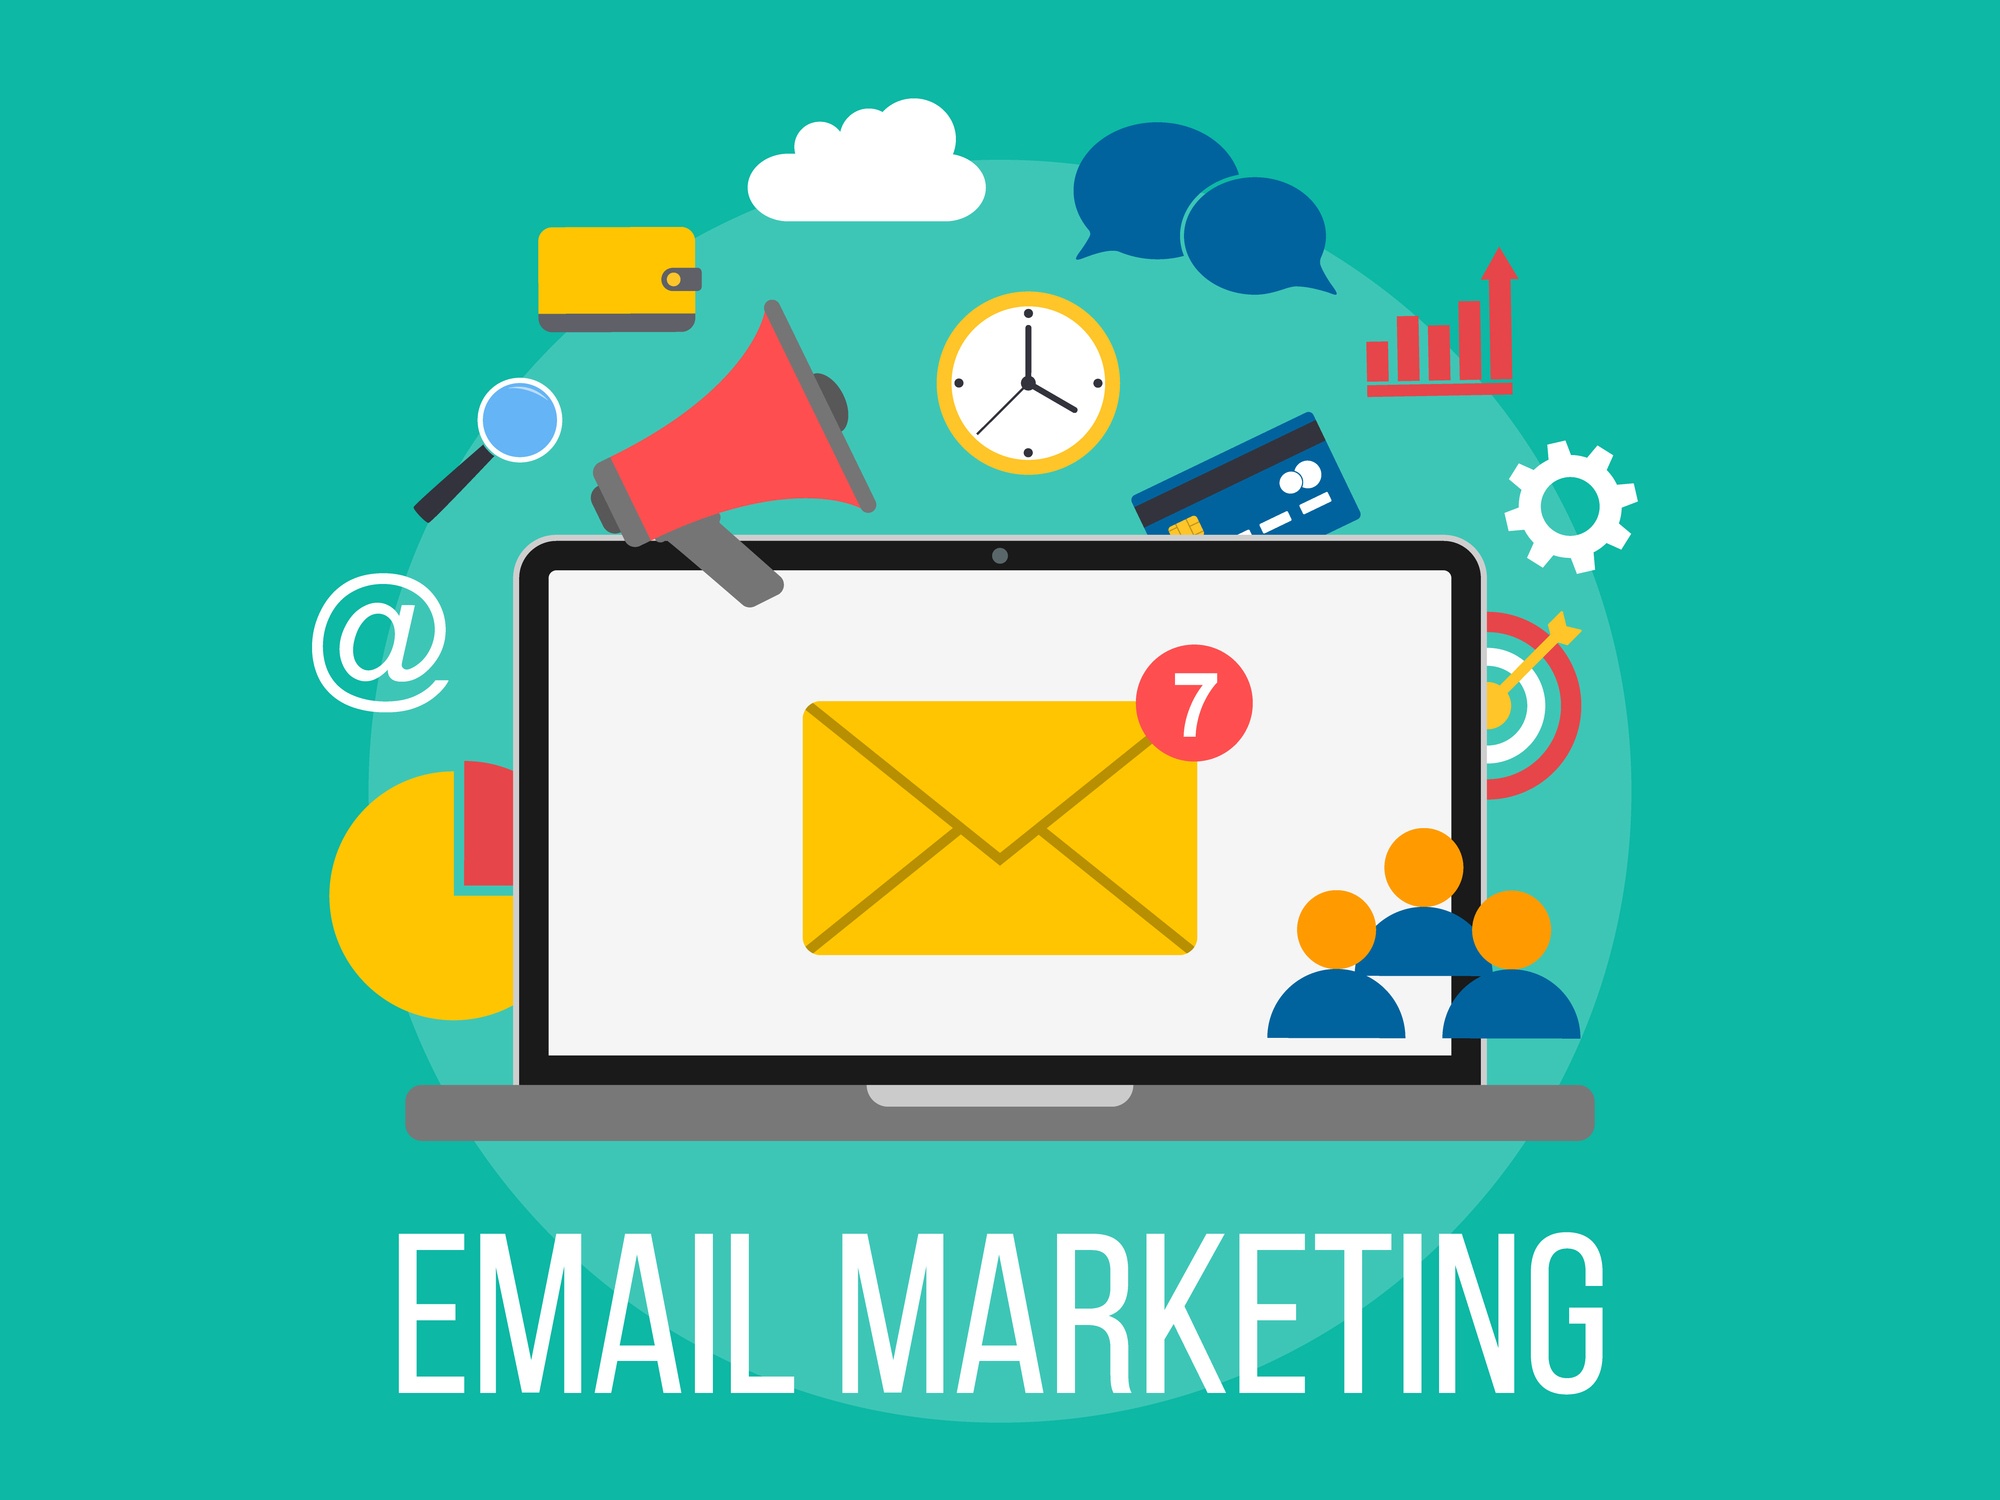 How to Build Your Email Marketing Lists for Maximum Results